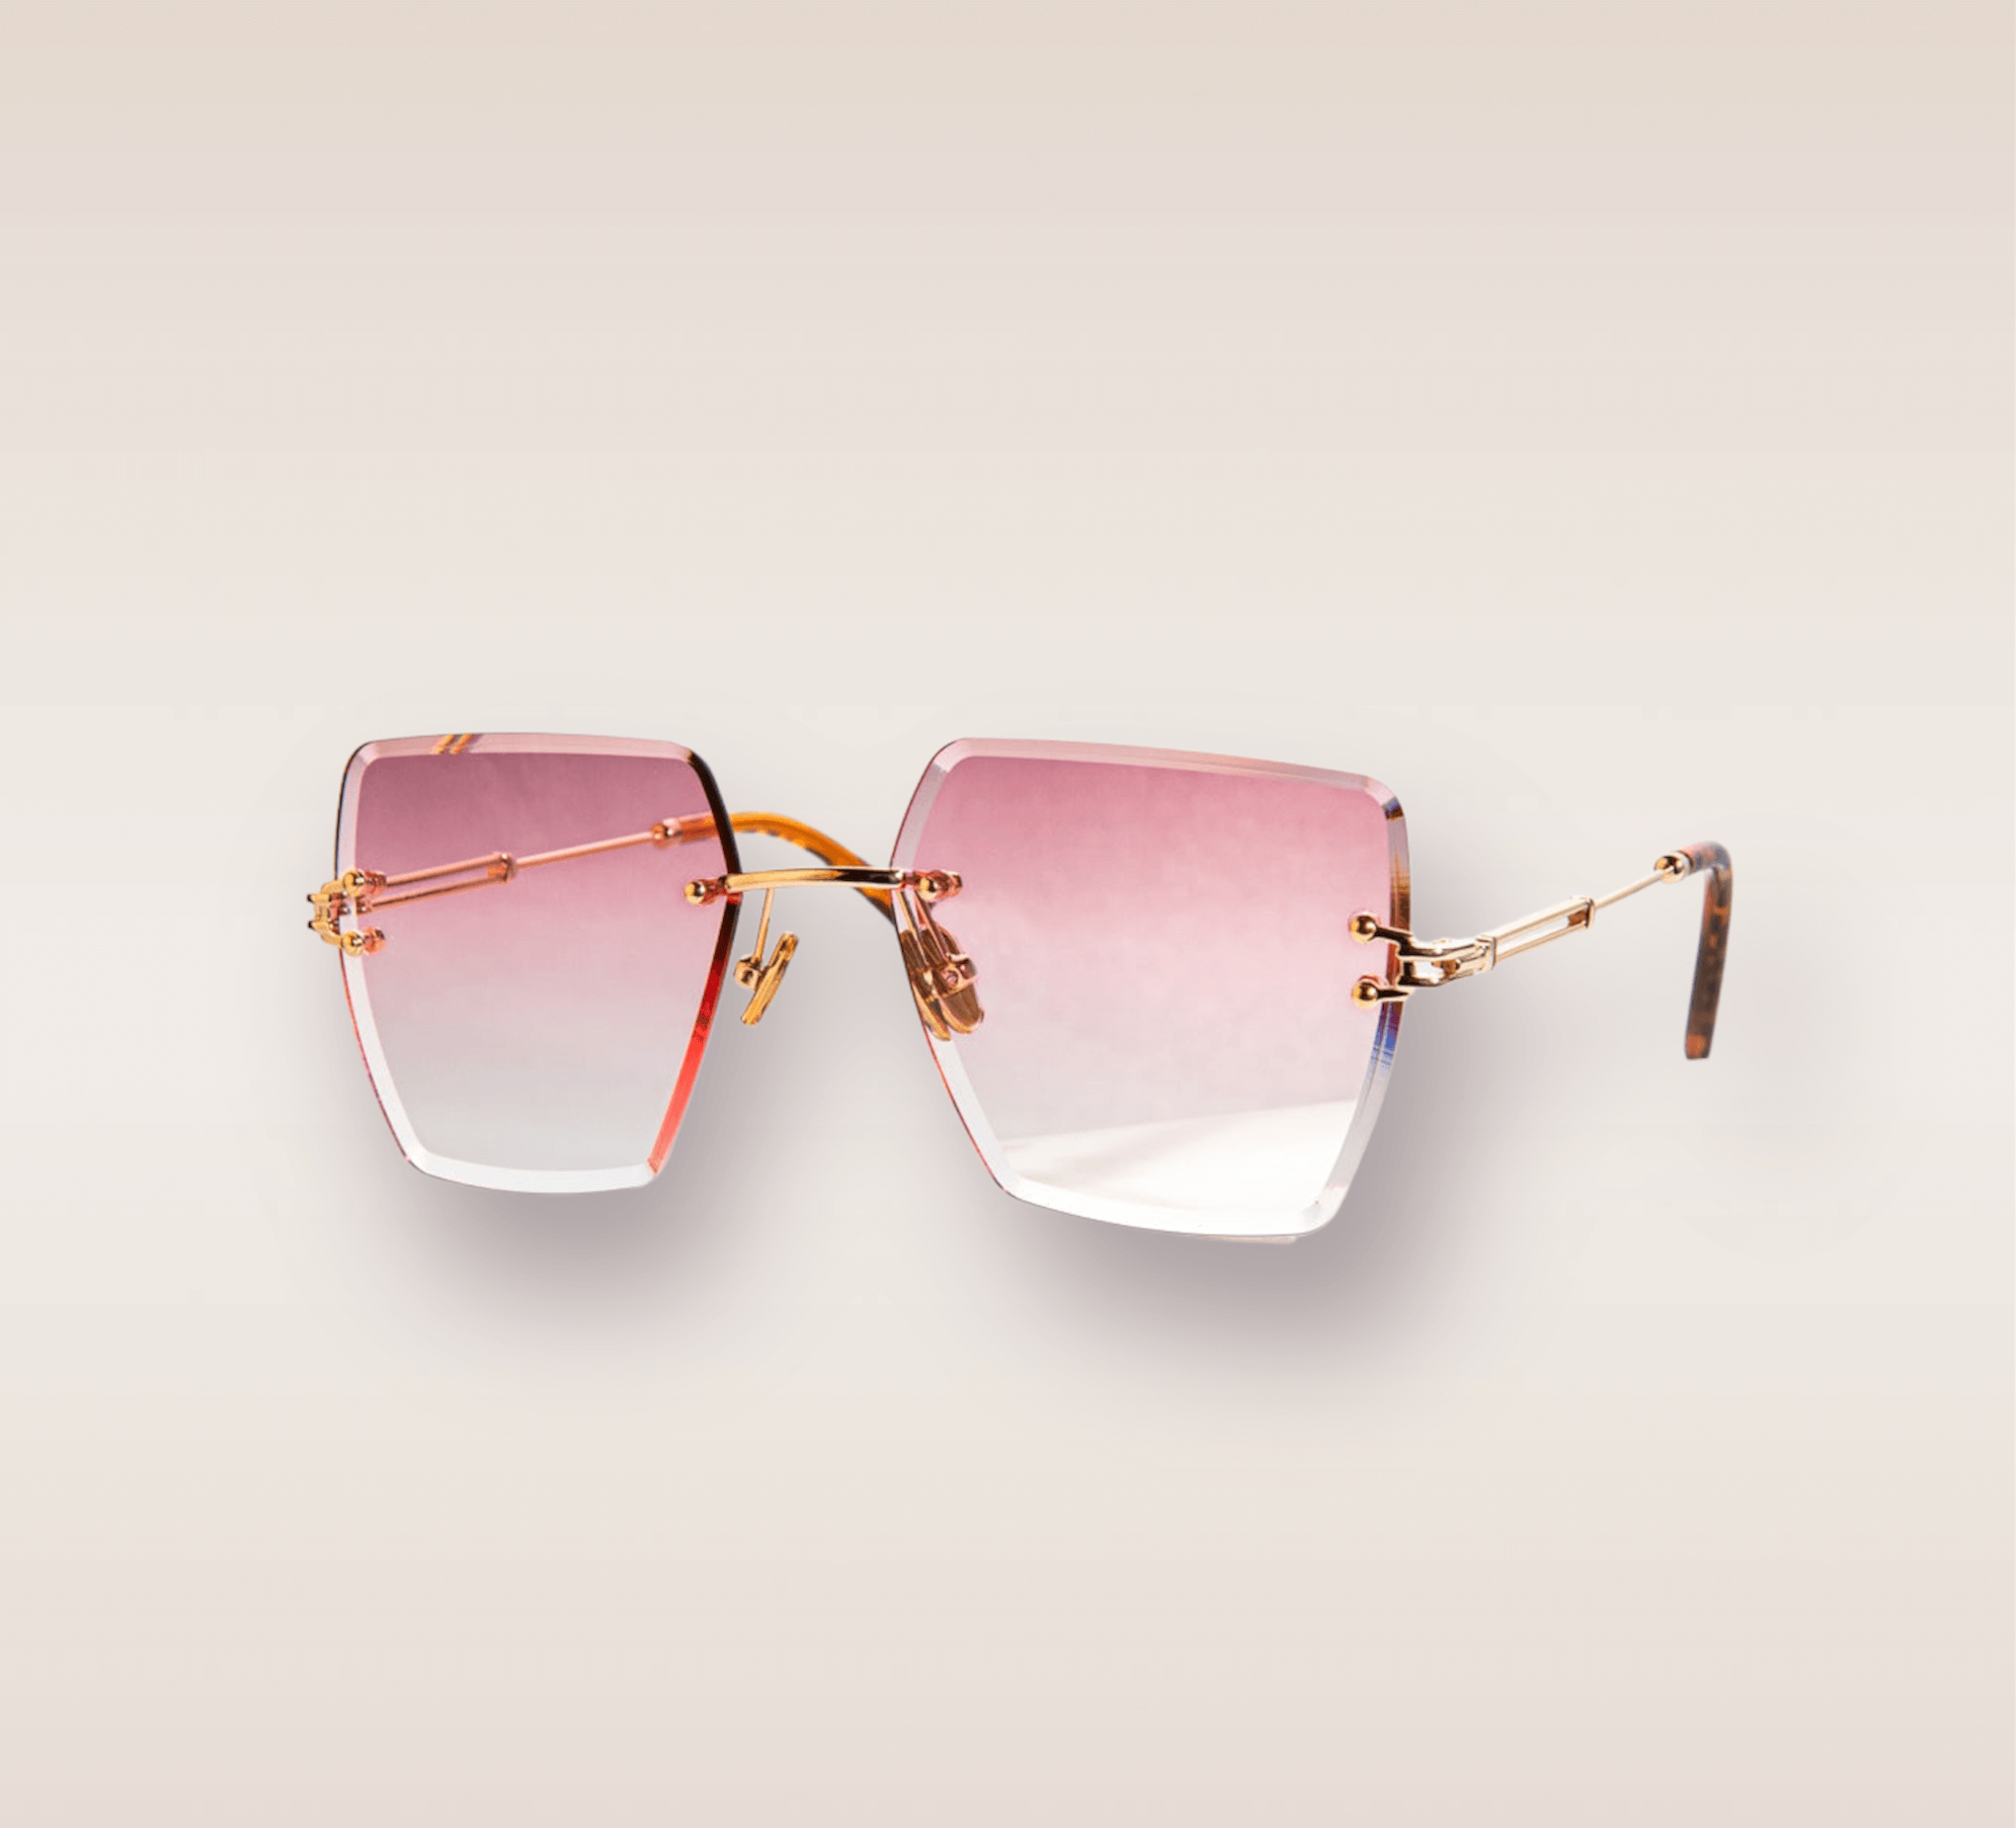 In this up-close shot, we are introduced to the captivating Cranberry Tint frames, a stylish and sophisticated eyewear option. The rimless frames feature a mesmerizing cranberry red gradient hue. The gold arms add a touch of opulence and refinement, complimenting the red tones with a warm metallic accent. These frames are a true fashion statement, combining modern design with a touch of luxury.